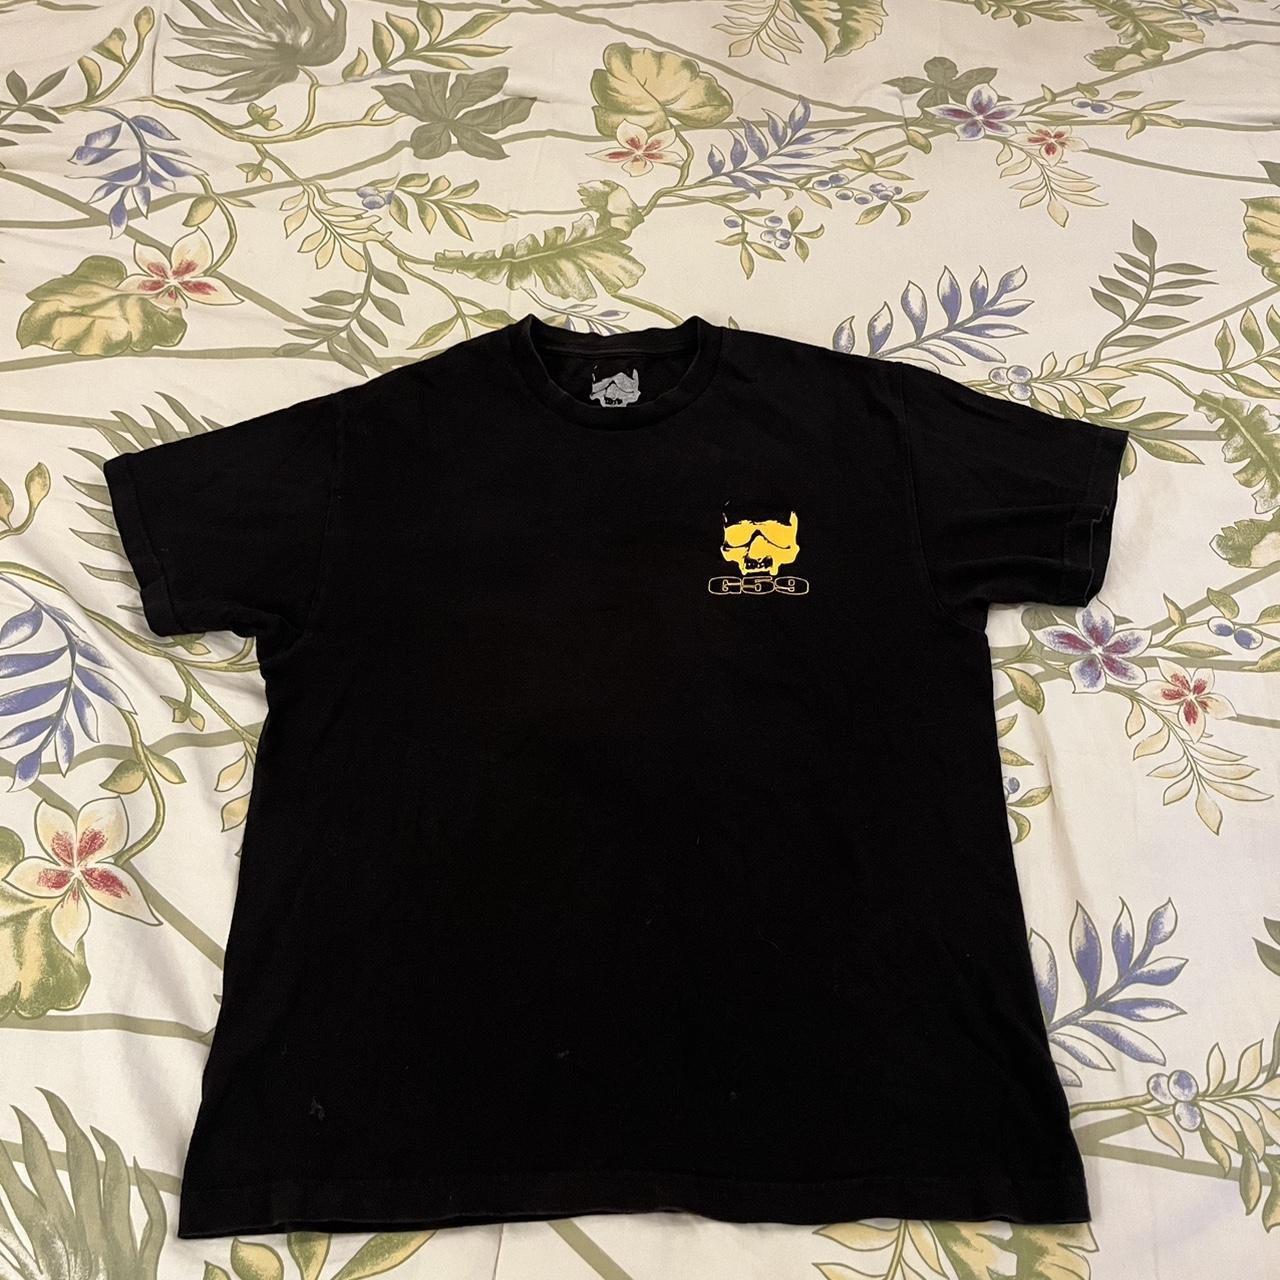 G59 records skull logo shirt Preowned comes in good... - Depop